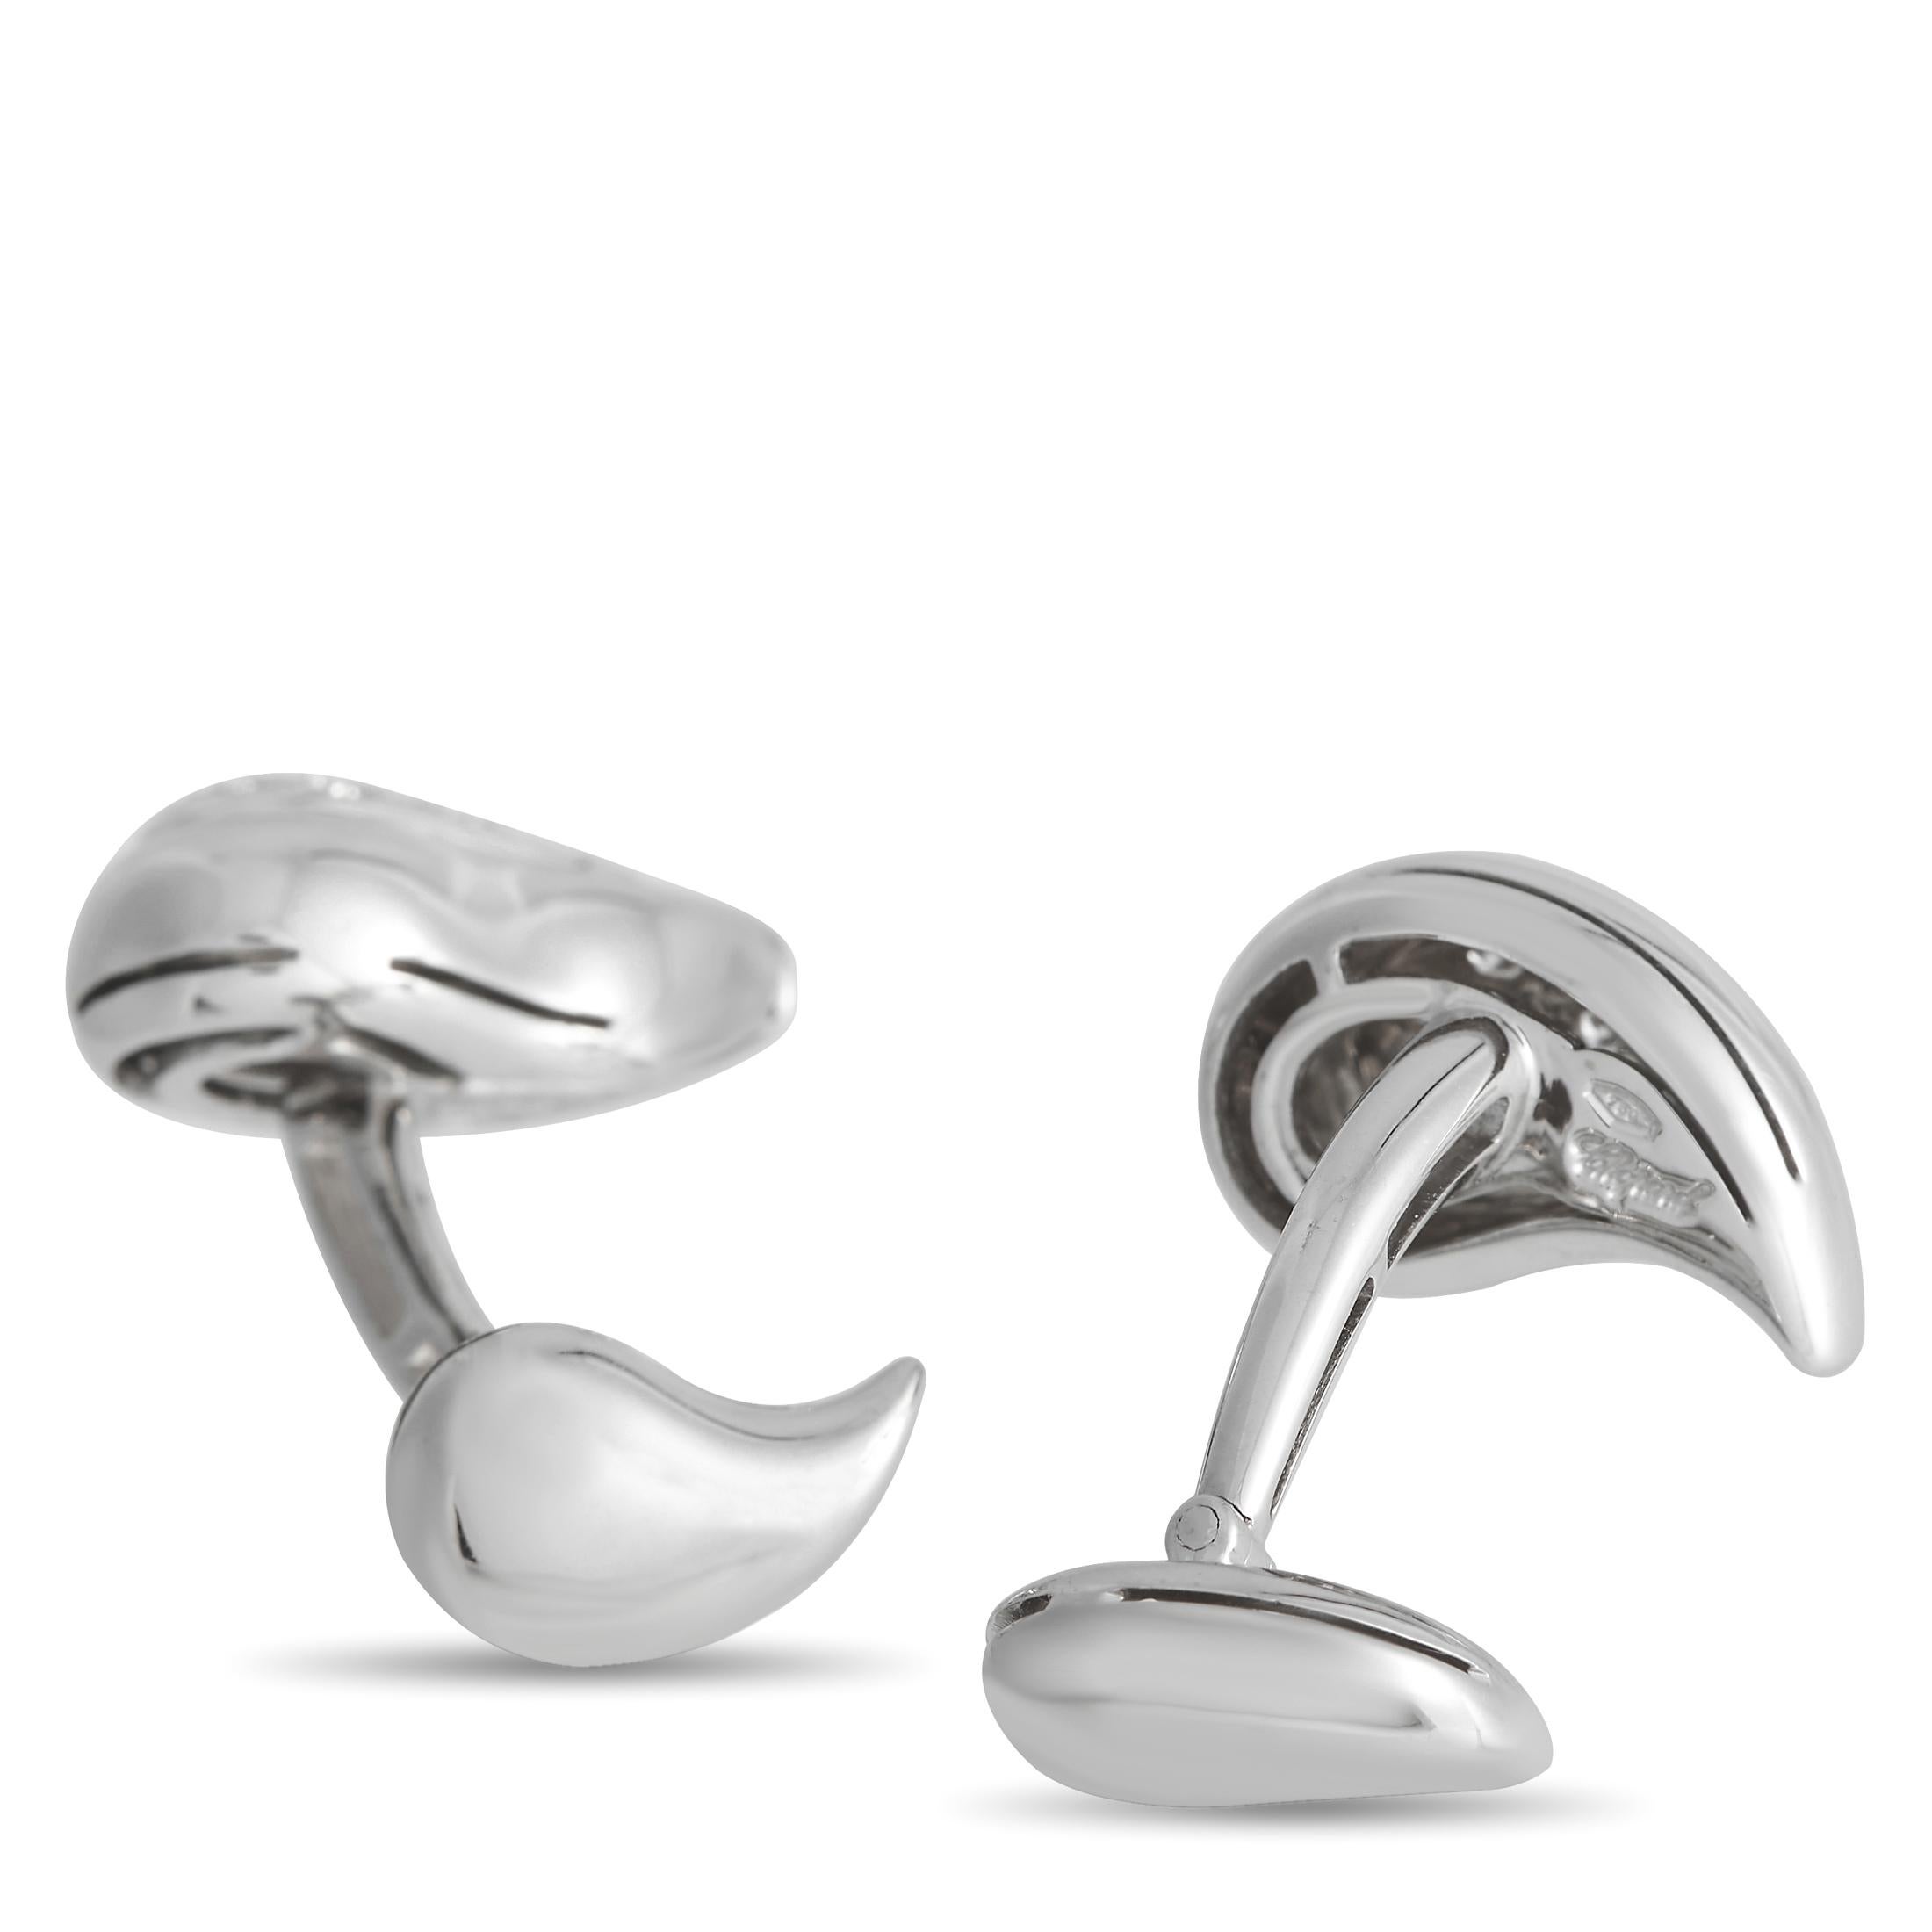 Polish a semi-formal or formal wear with these Chopard cufflinks. They come with a refined paisley shape, crafted in solid 18K white gold. The shiny teardrop-silhouette with a curved tip is complemented by a cluster of round diamonds.This pair of